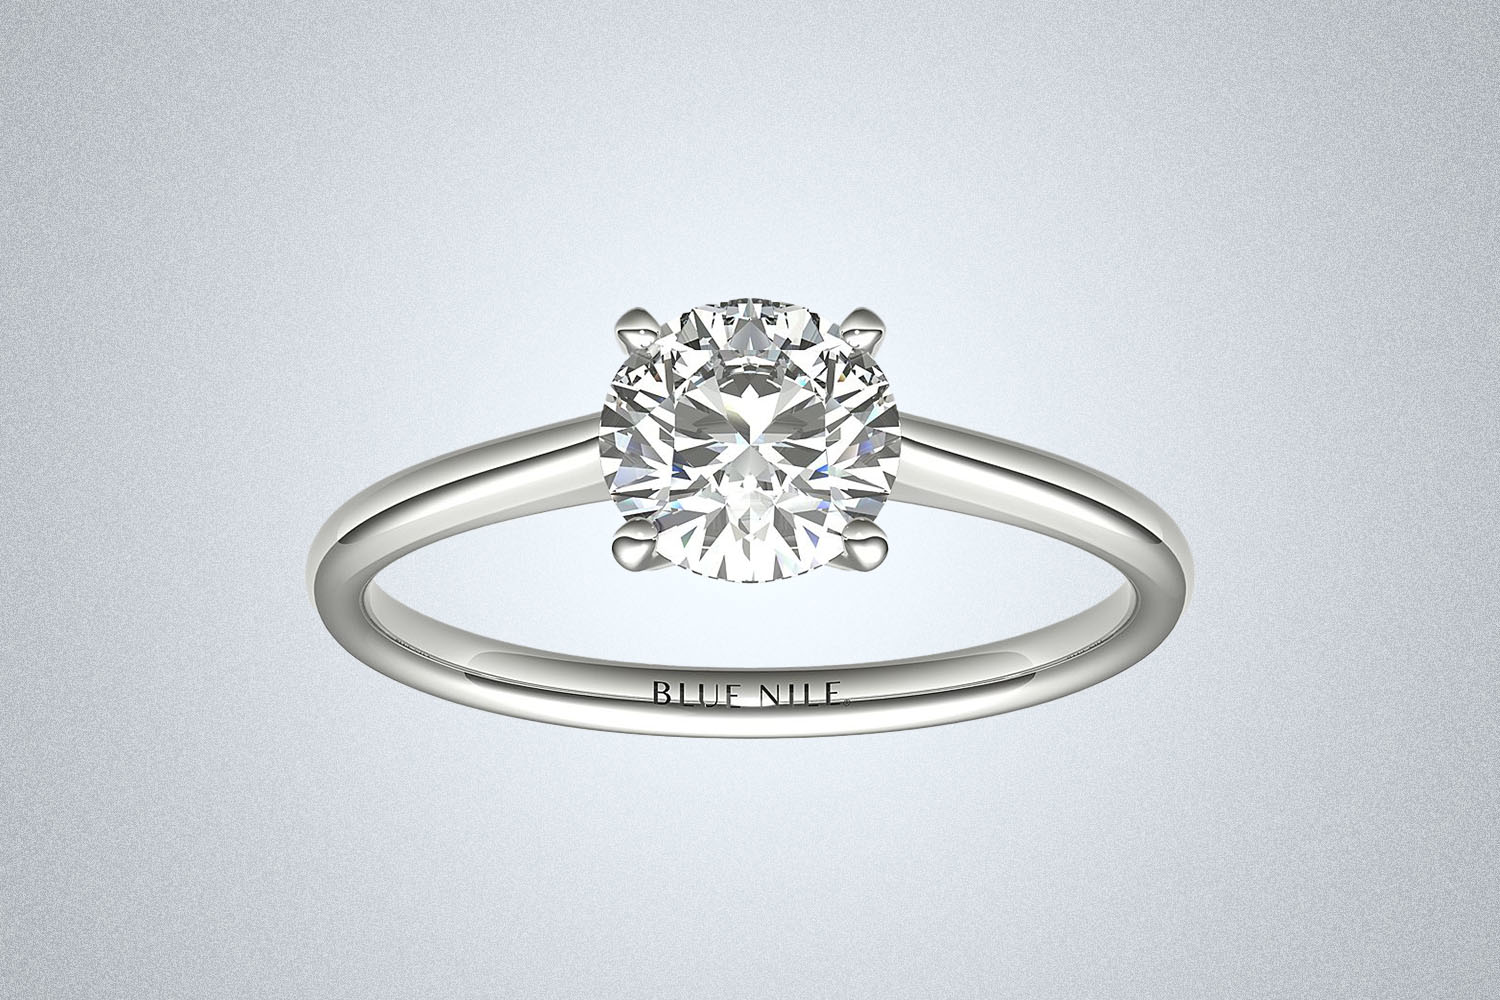 A Blue Nile Petite Solitaire Engagement Ring on a gray background